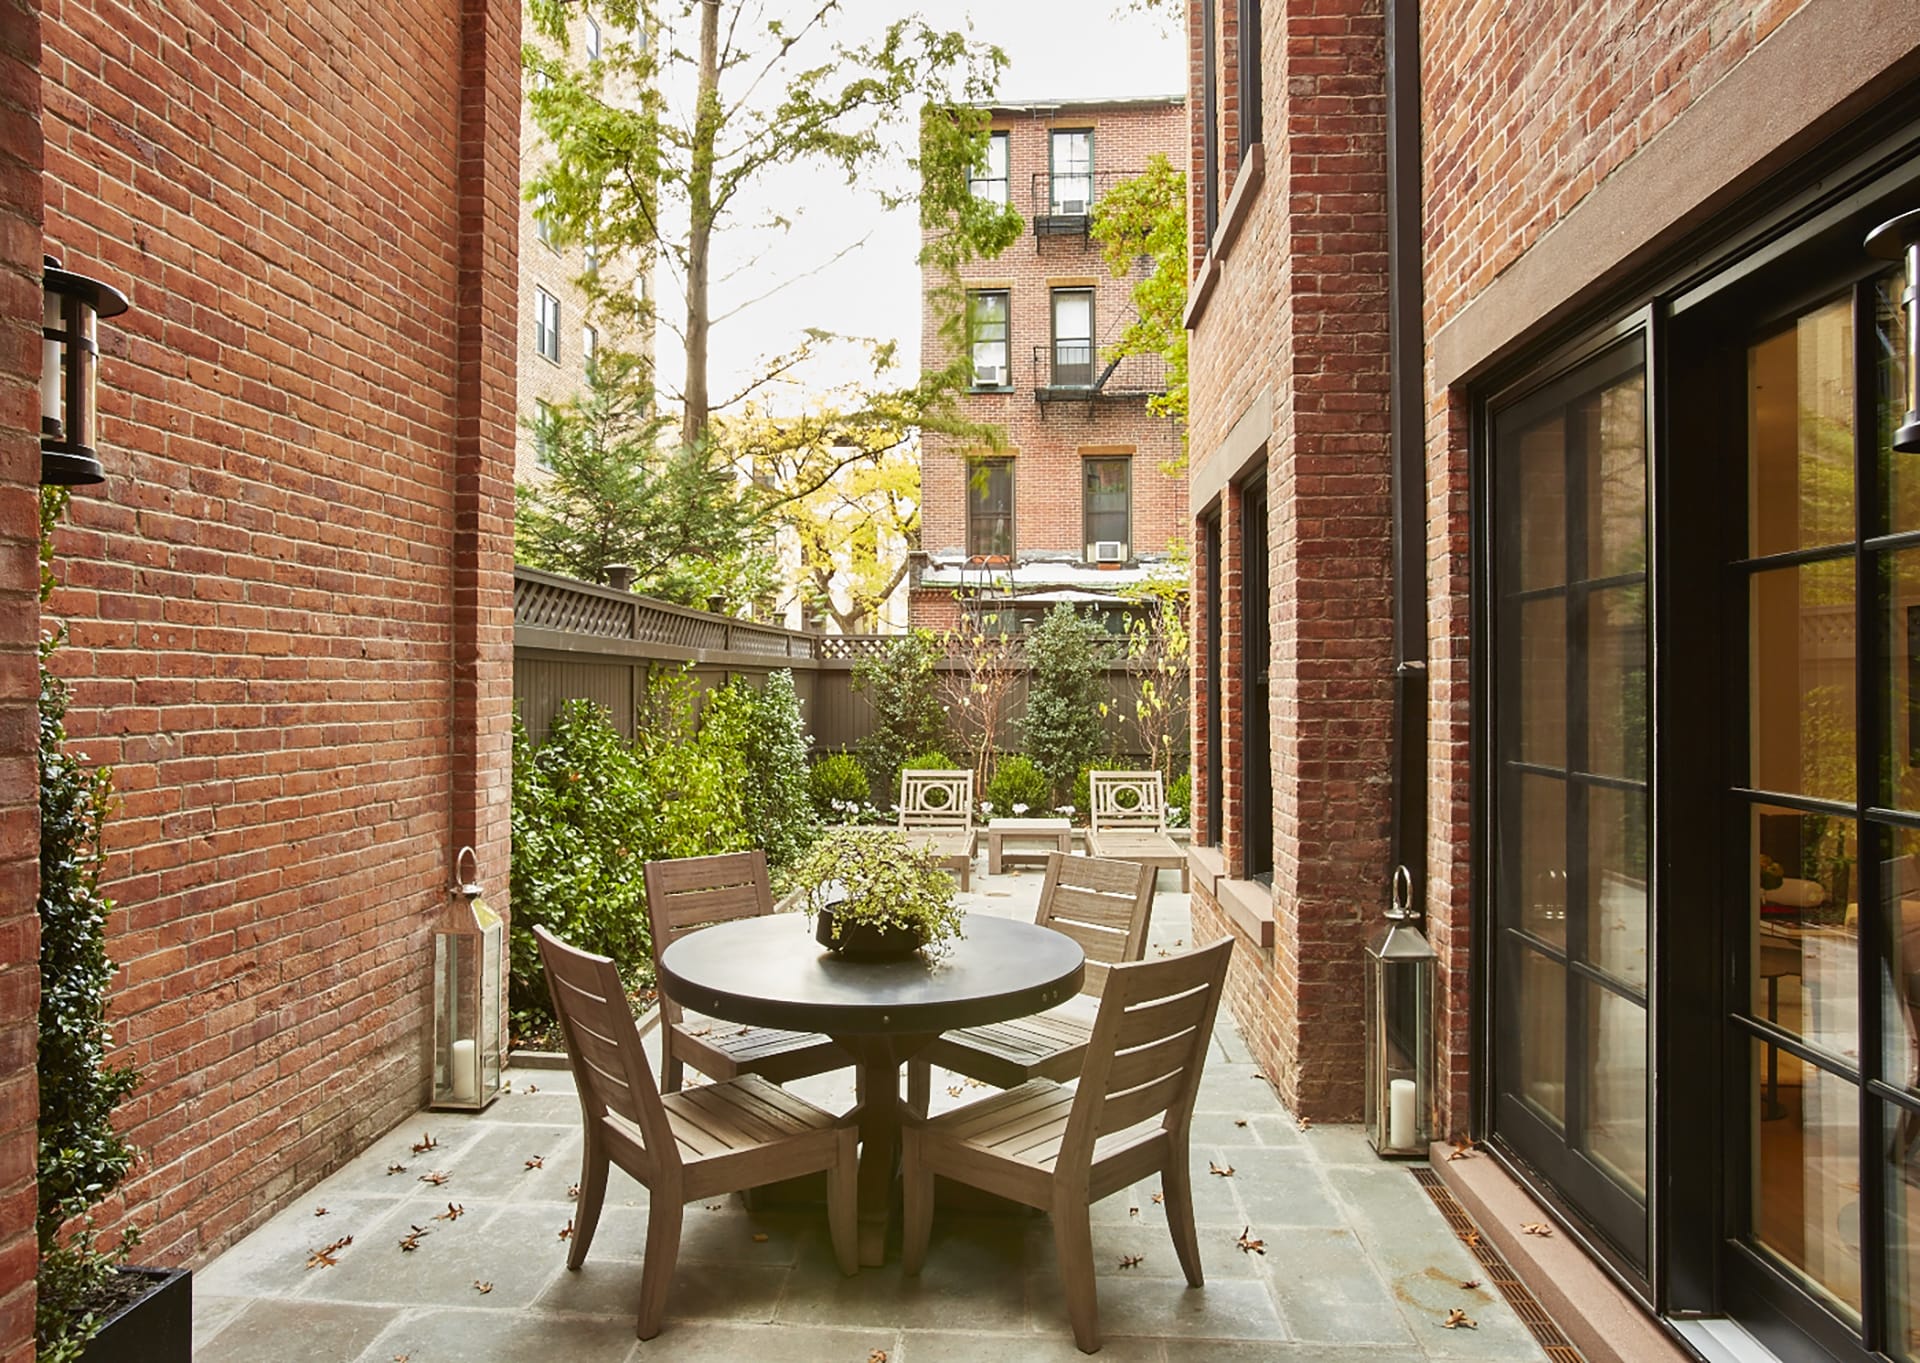 Rear garden of a Brooklyn Heights Passive House with outdoor seating.